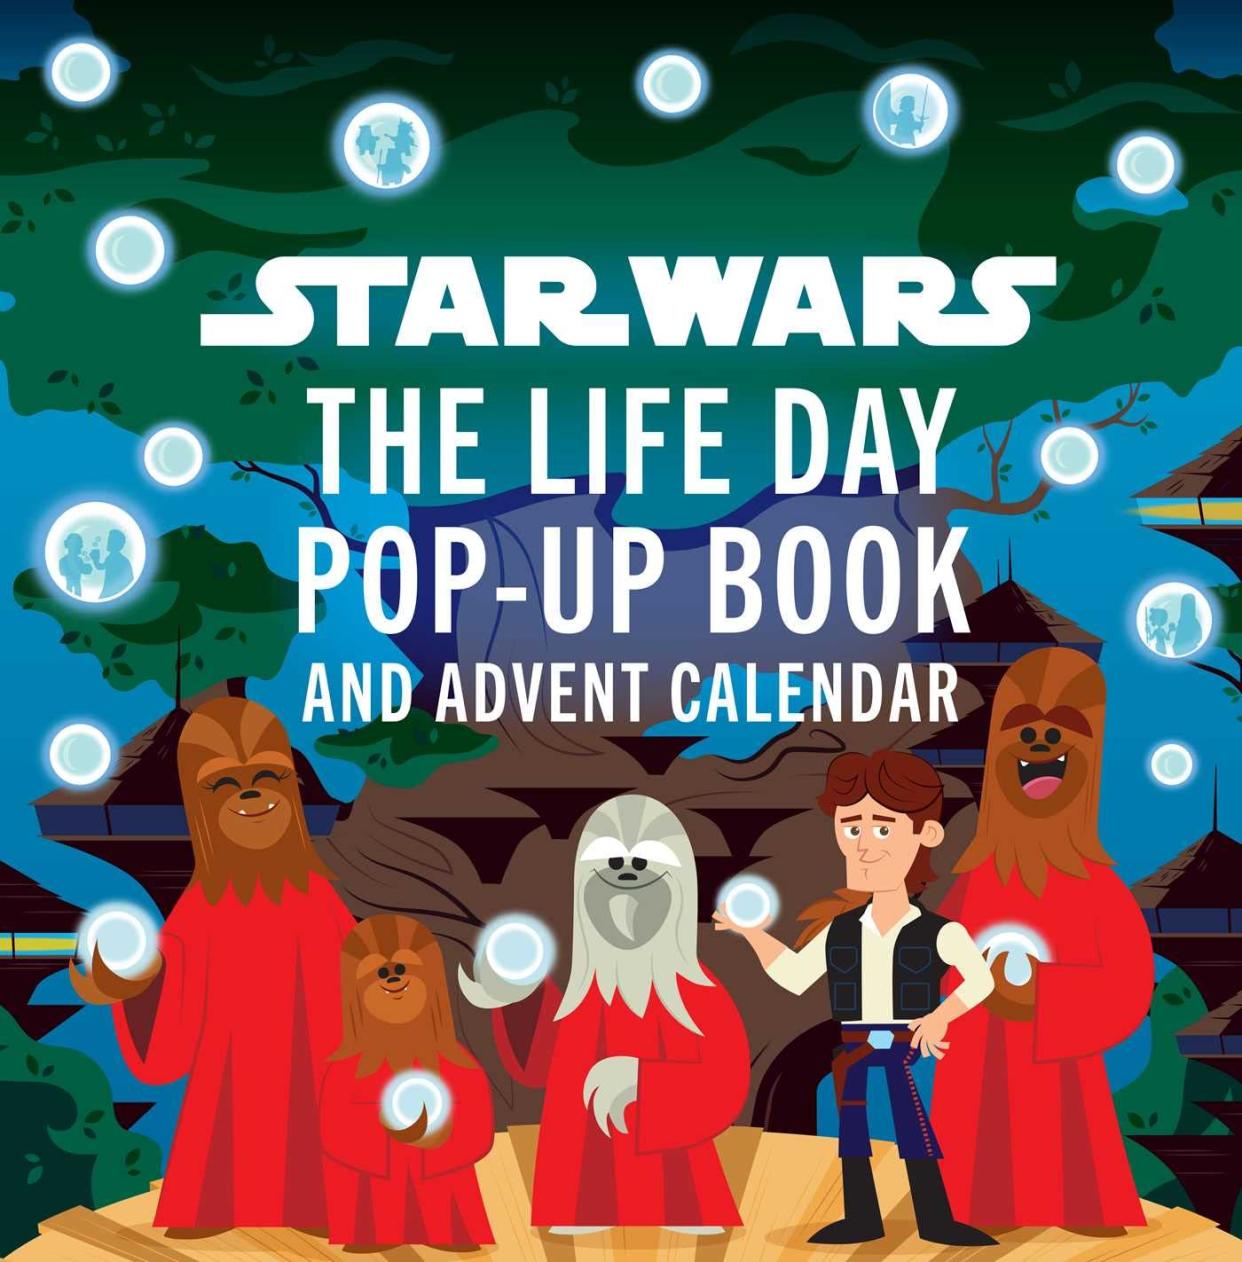 "Star Wars: The Life Day Pop Up & Advent Calendar"